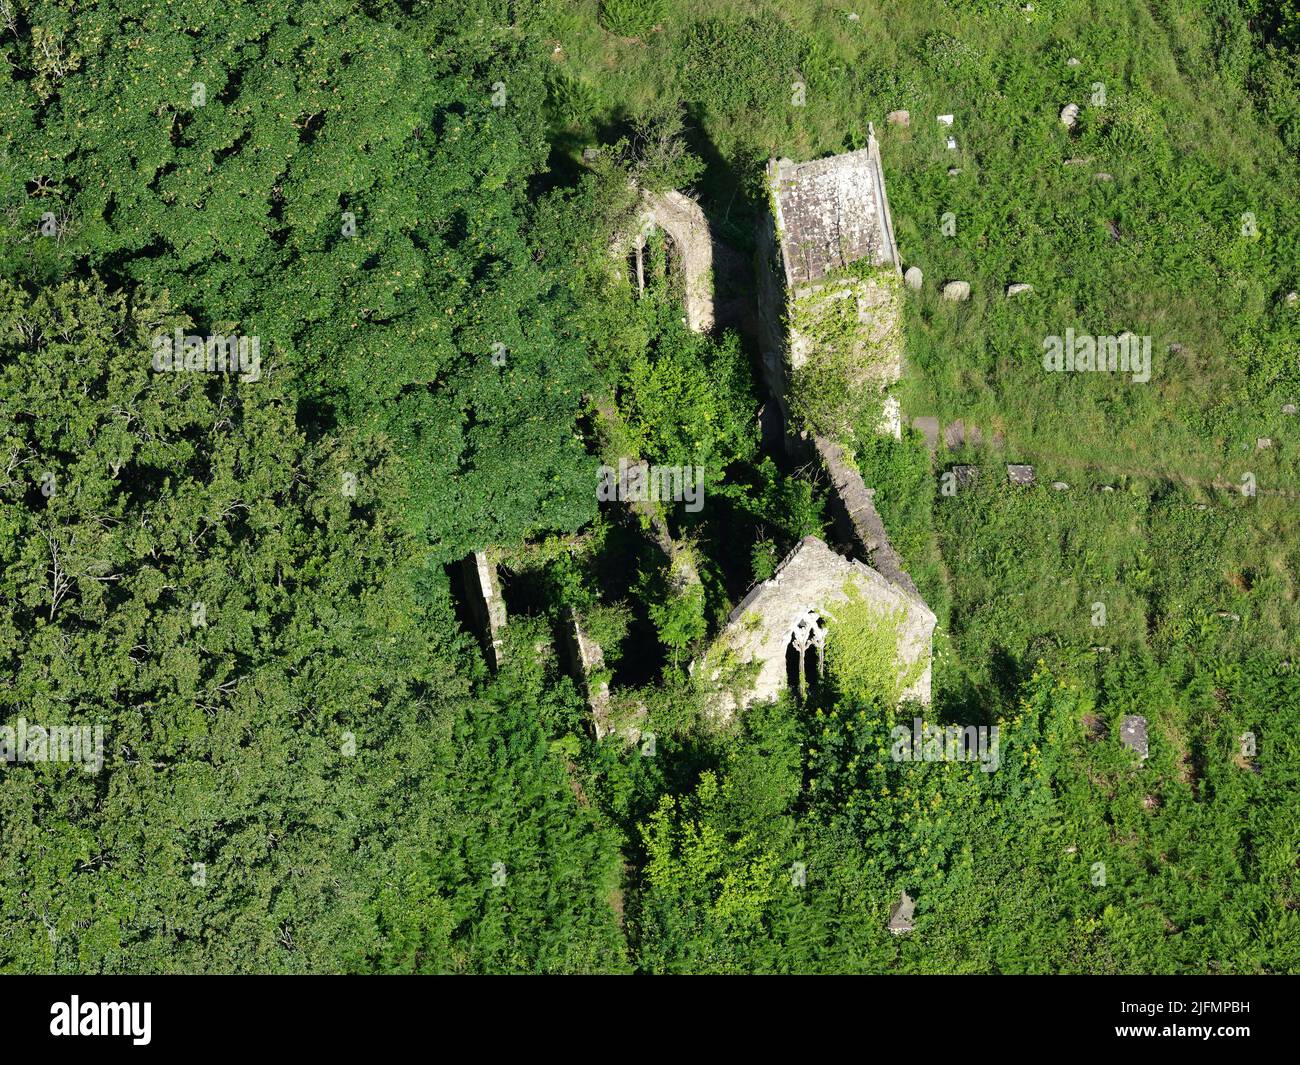 AERIAL VIEW. Abandoned church of St Mary overgrown by vegetation. Tintern, Monmouthshire, Wales, United Kingdom. Stock Photo